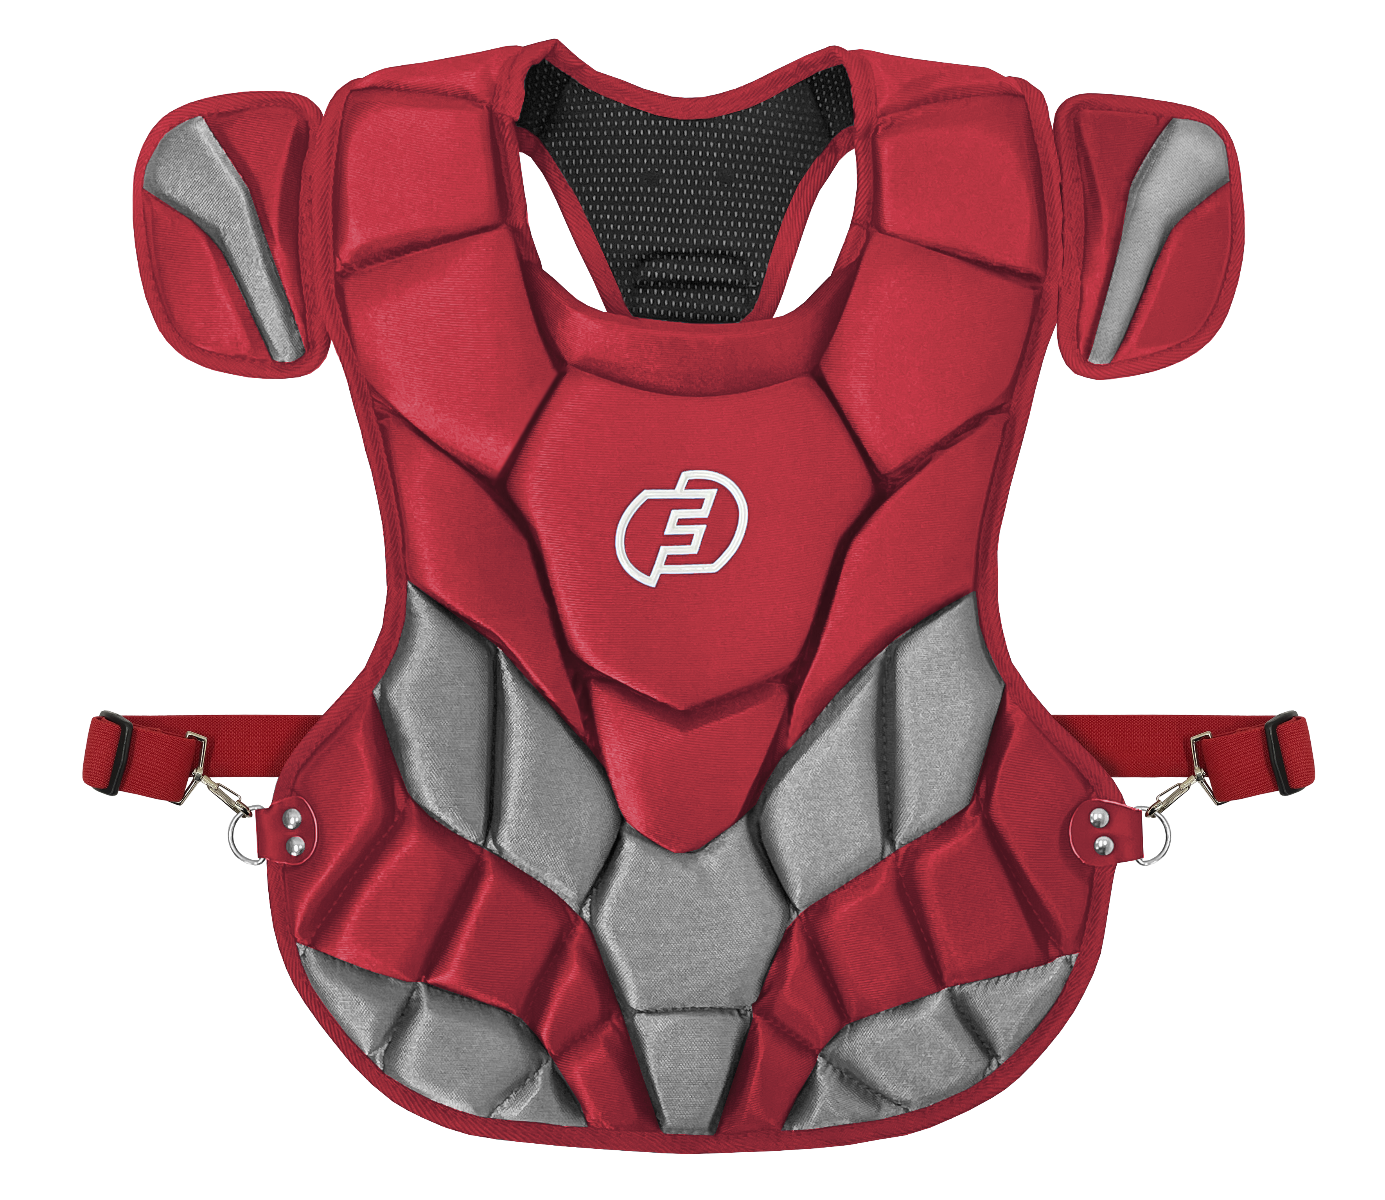 https://www.force3progear.com/media/catalog/product/cache/23fae6adbf91791abd59cd2a8977287b/2/2/22-force3-chest-protectors-nocsae-front-red.png